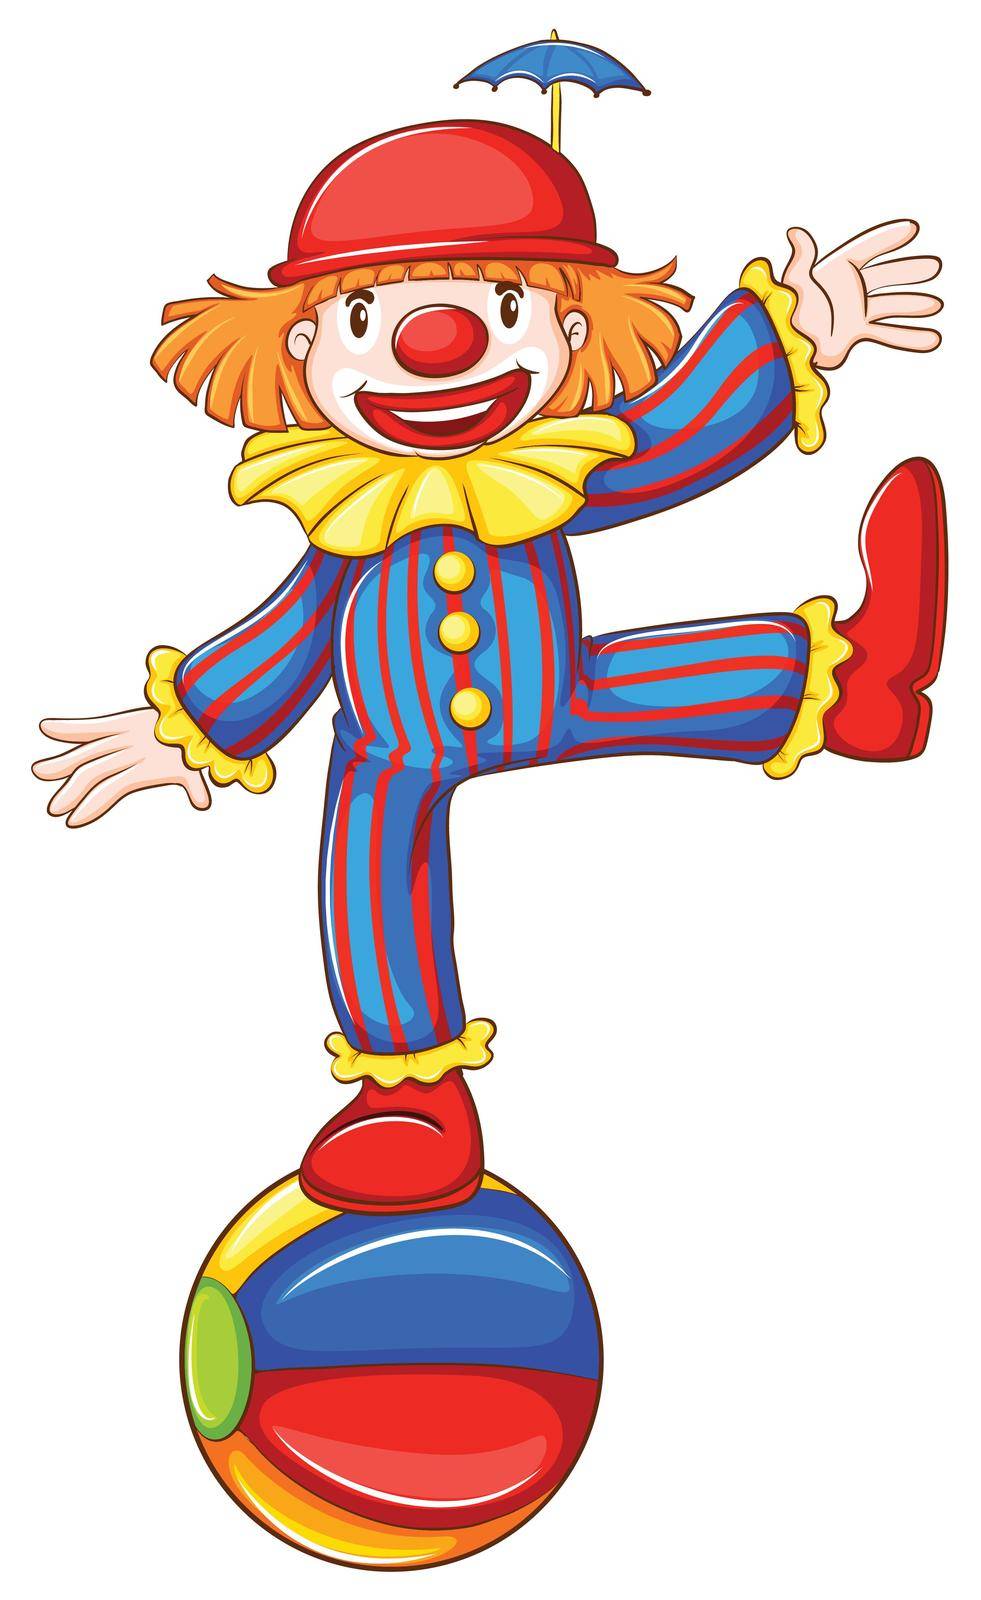 A simple drawing of a playful clown by iimages